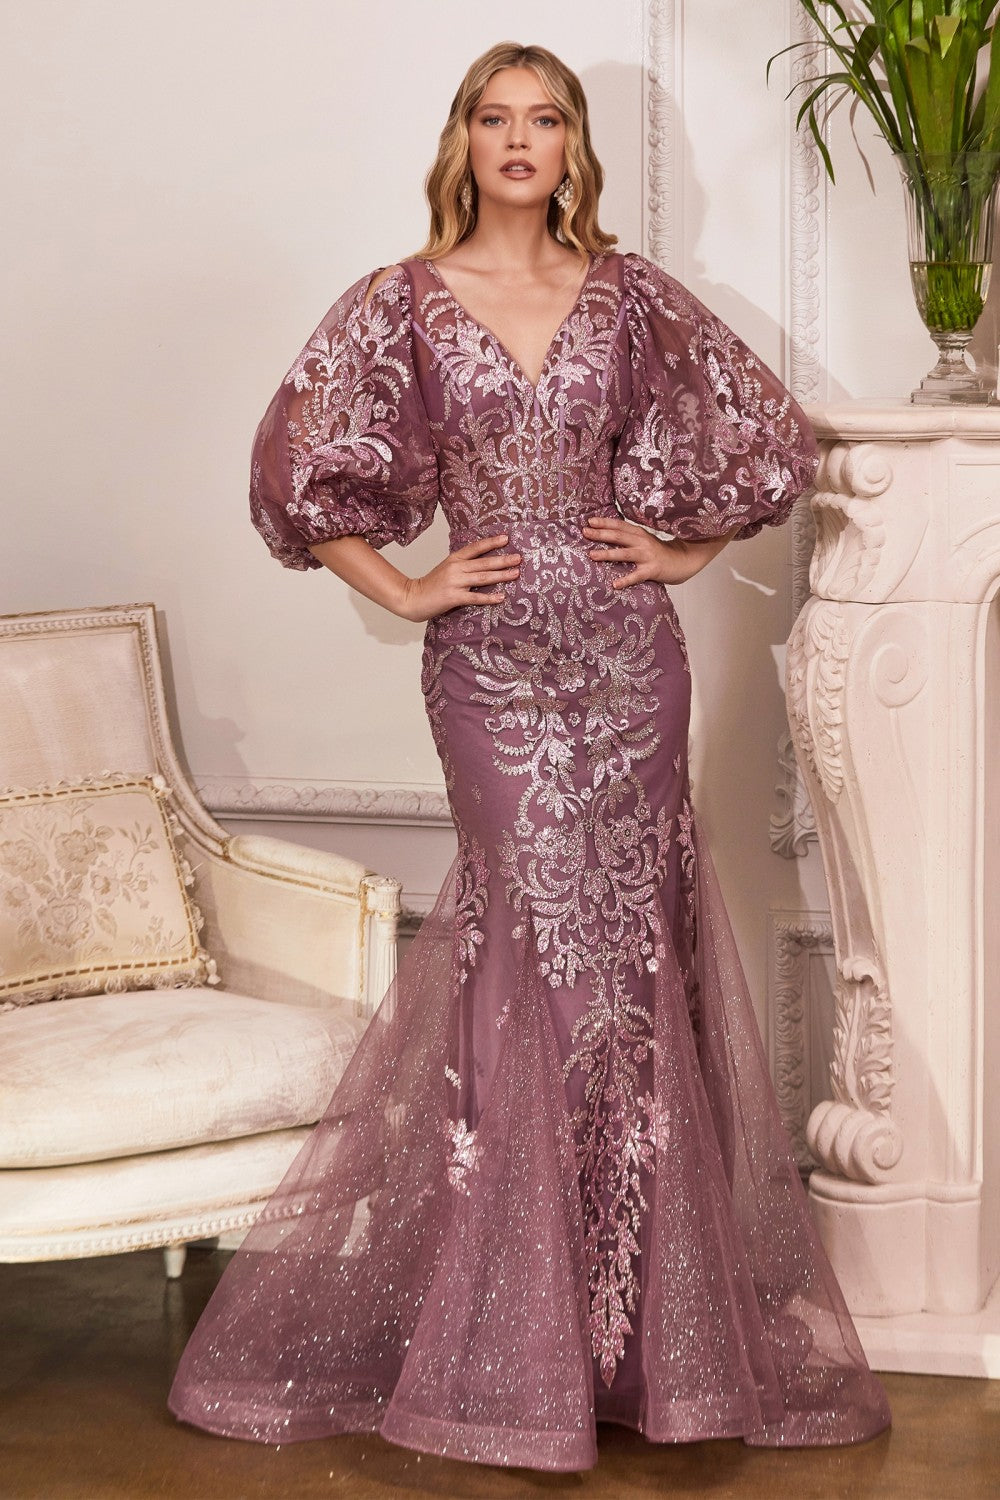 CD OC009 - Metallic Glitter Fit & Flare Prom Gown with Bead Accented Scroll Print 3/4 Sleeves & Sheer Boned  V-Neck Bodice Mother of the Bride Cinderella Divine 8 VIOLET 